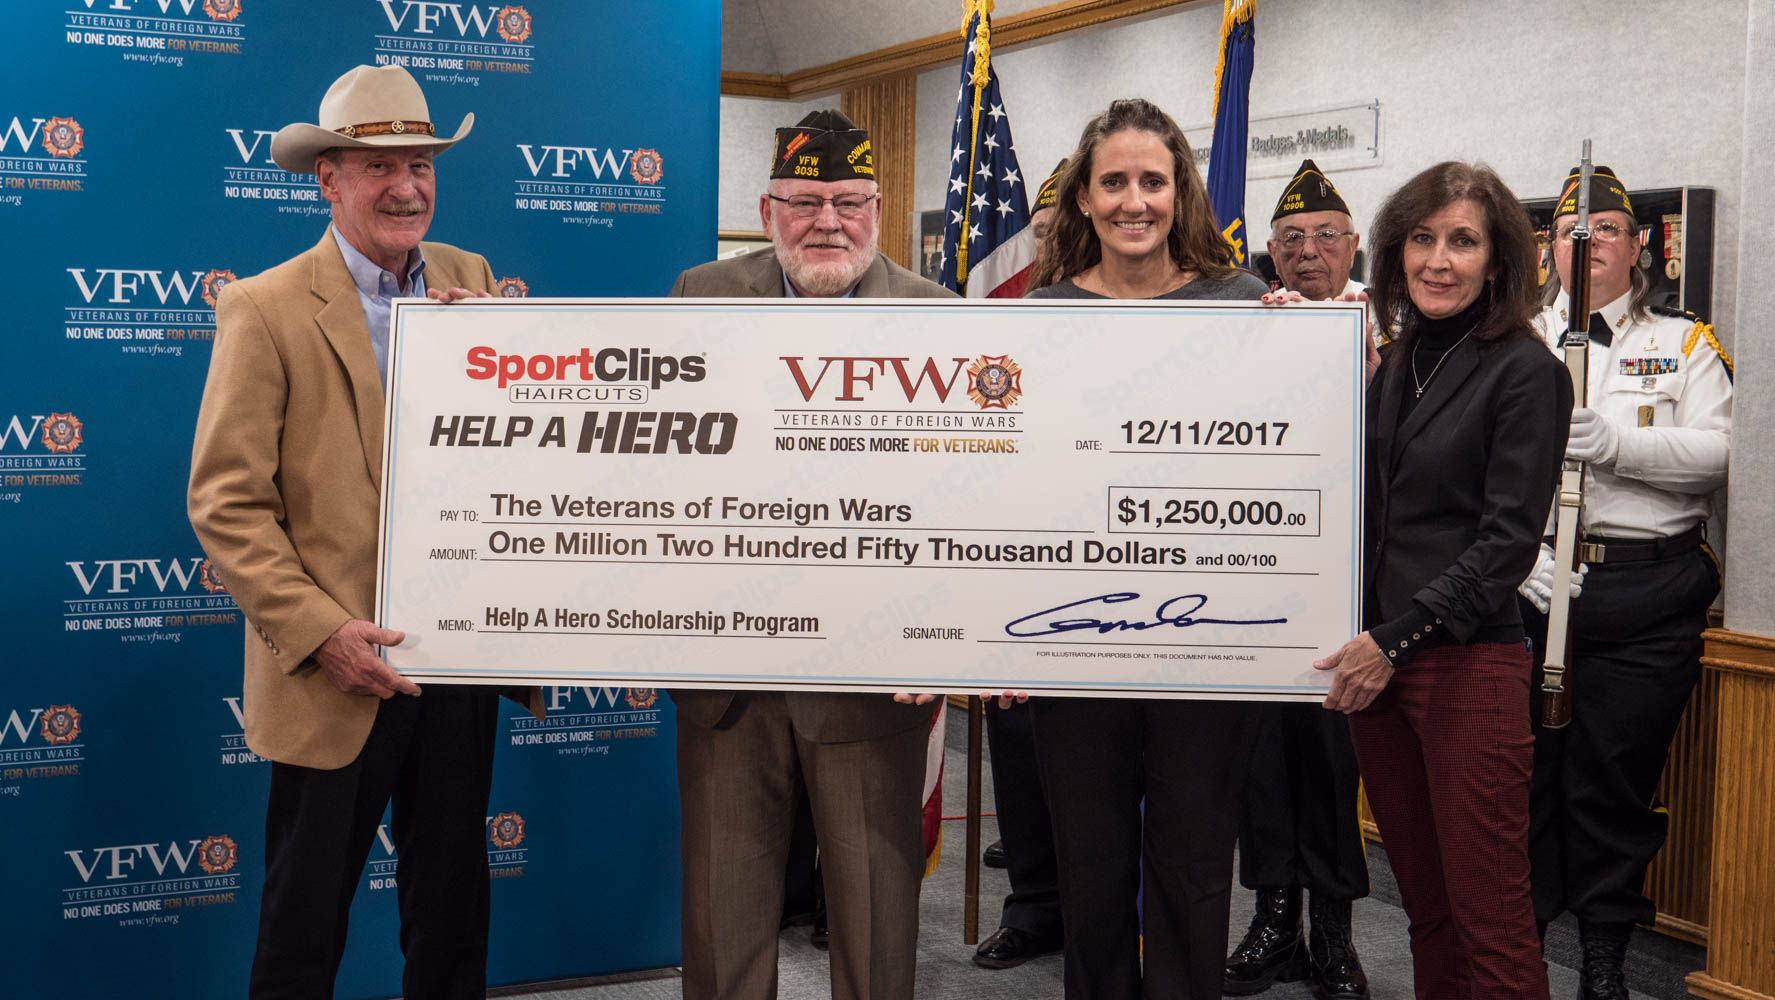 Sport Clips and the VFW raised $1.25 million for the Help a Hero scholarship program